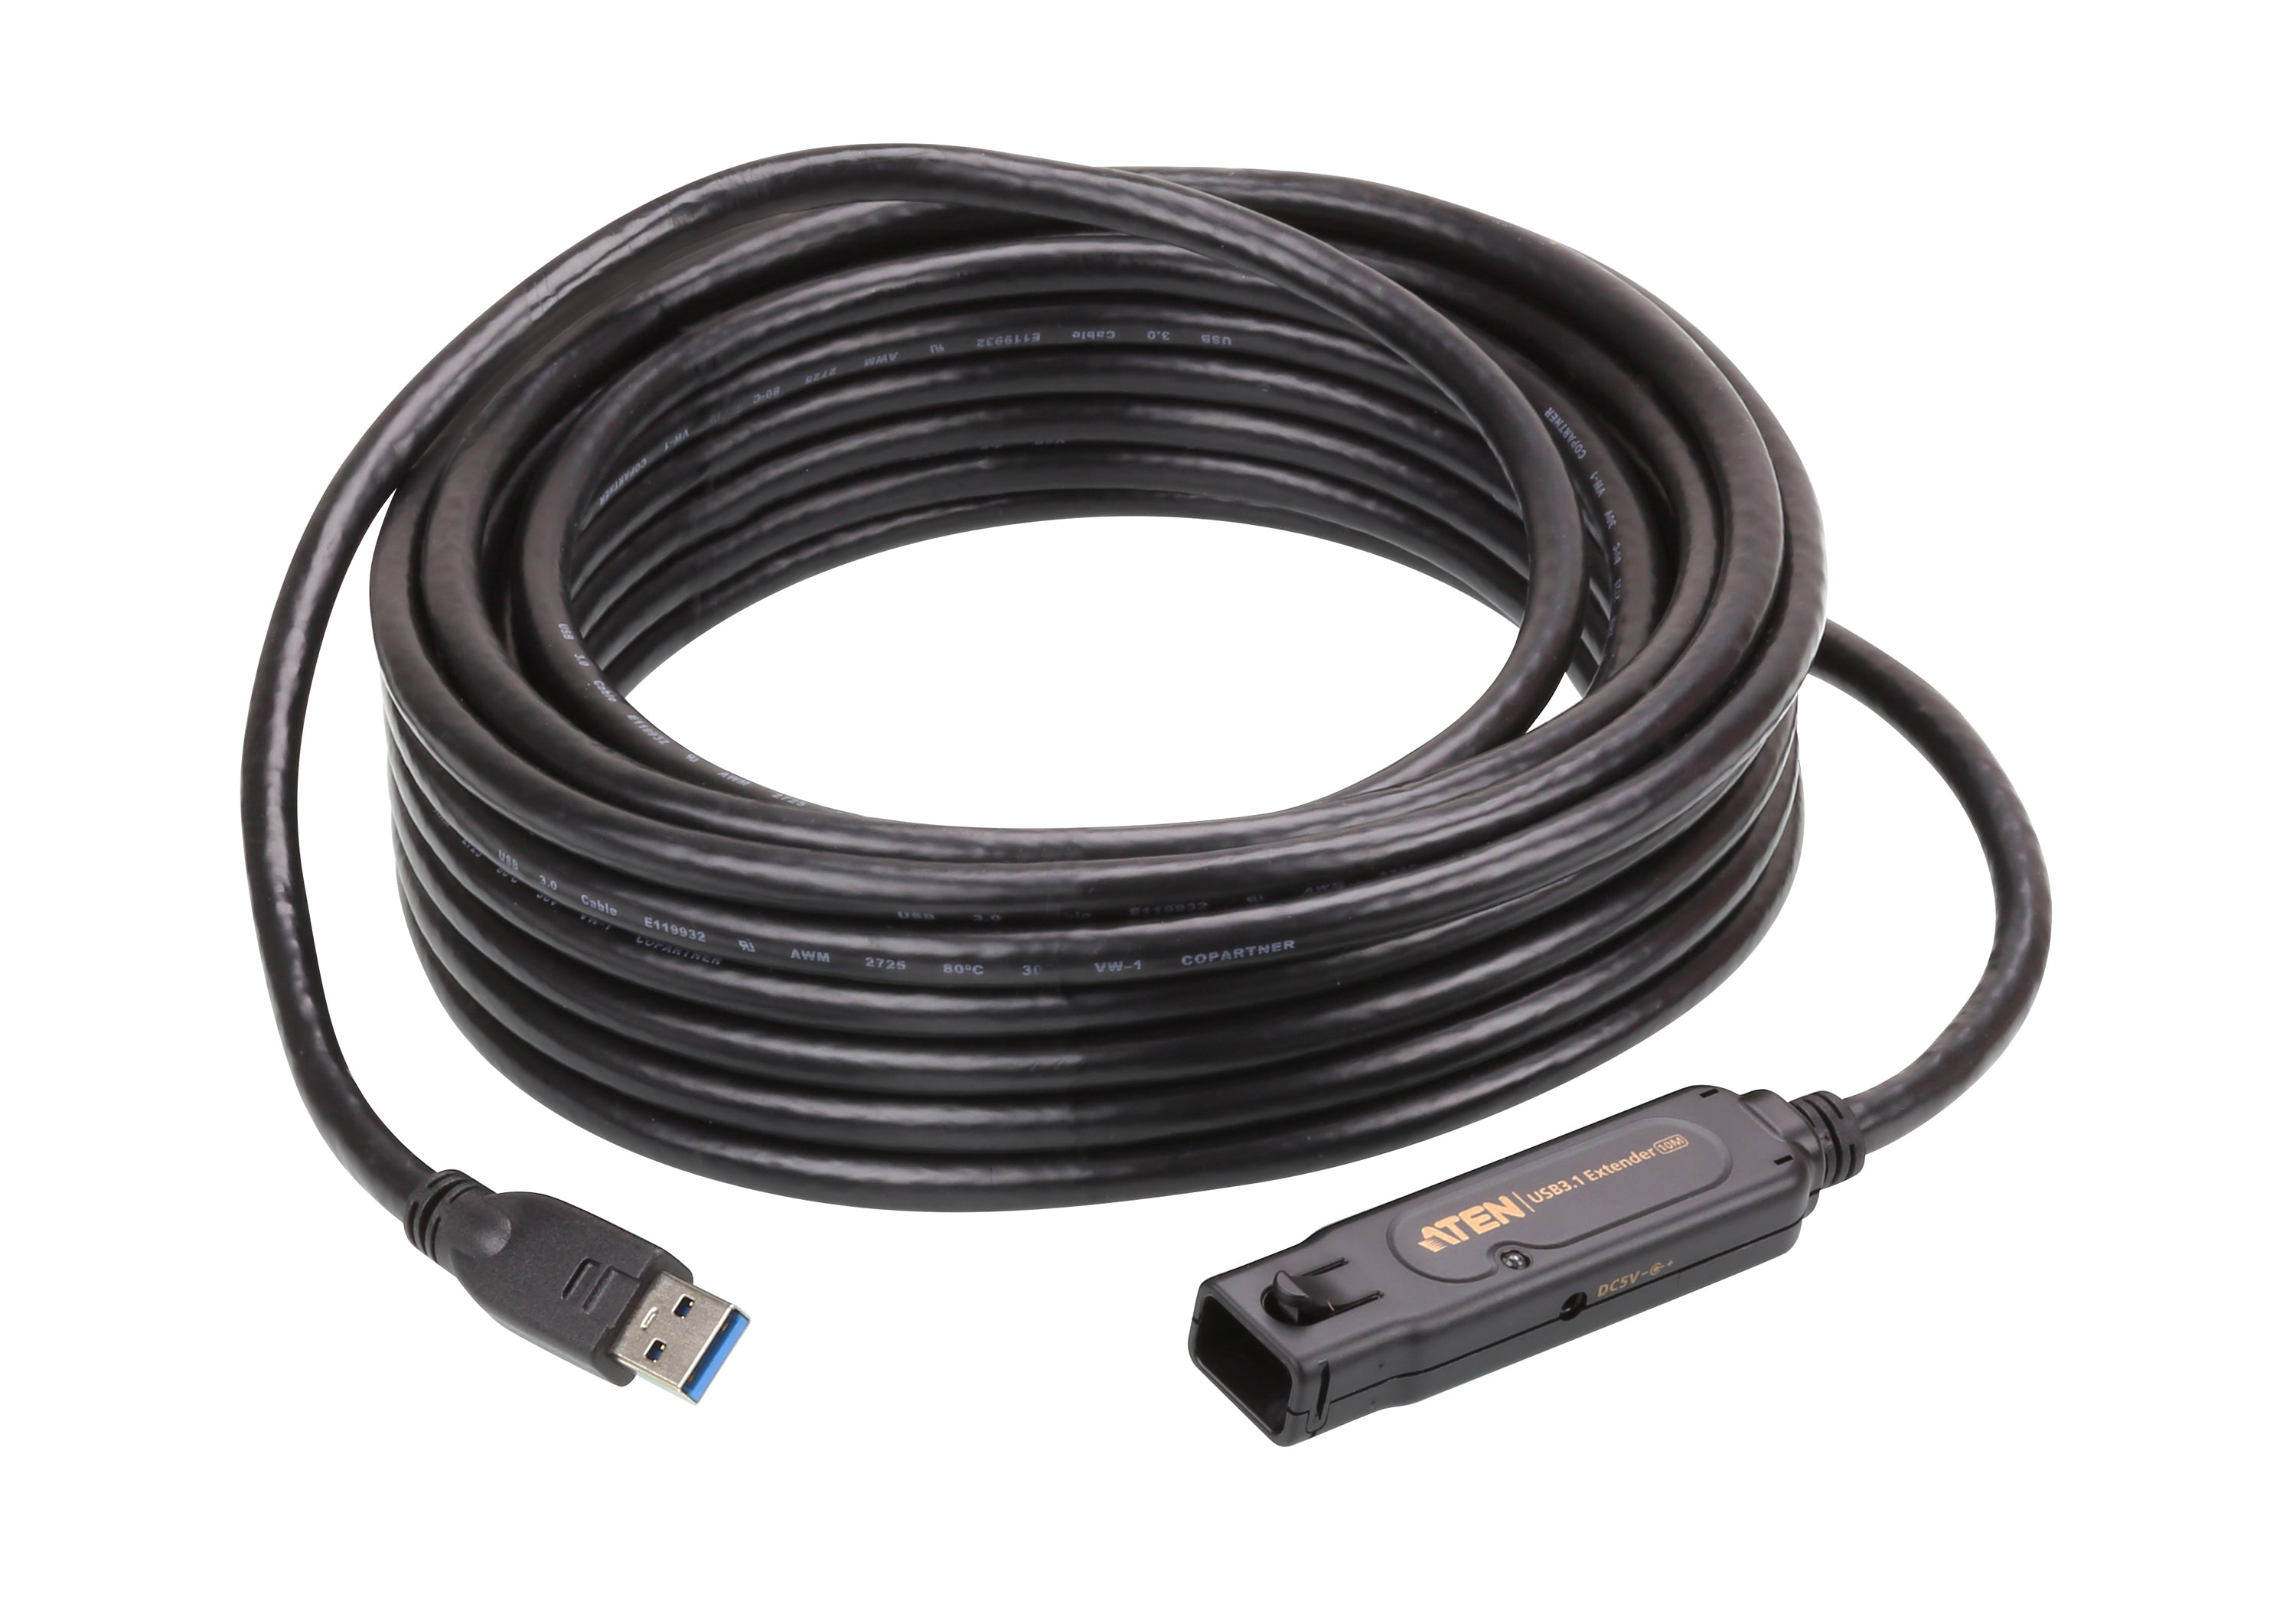 Aten Extender Cable, 15.0m, USB - UE3315A